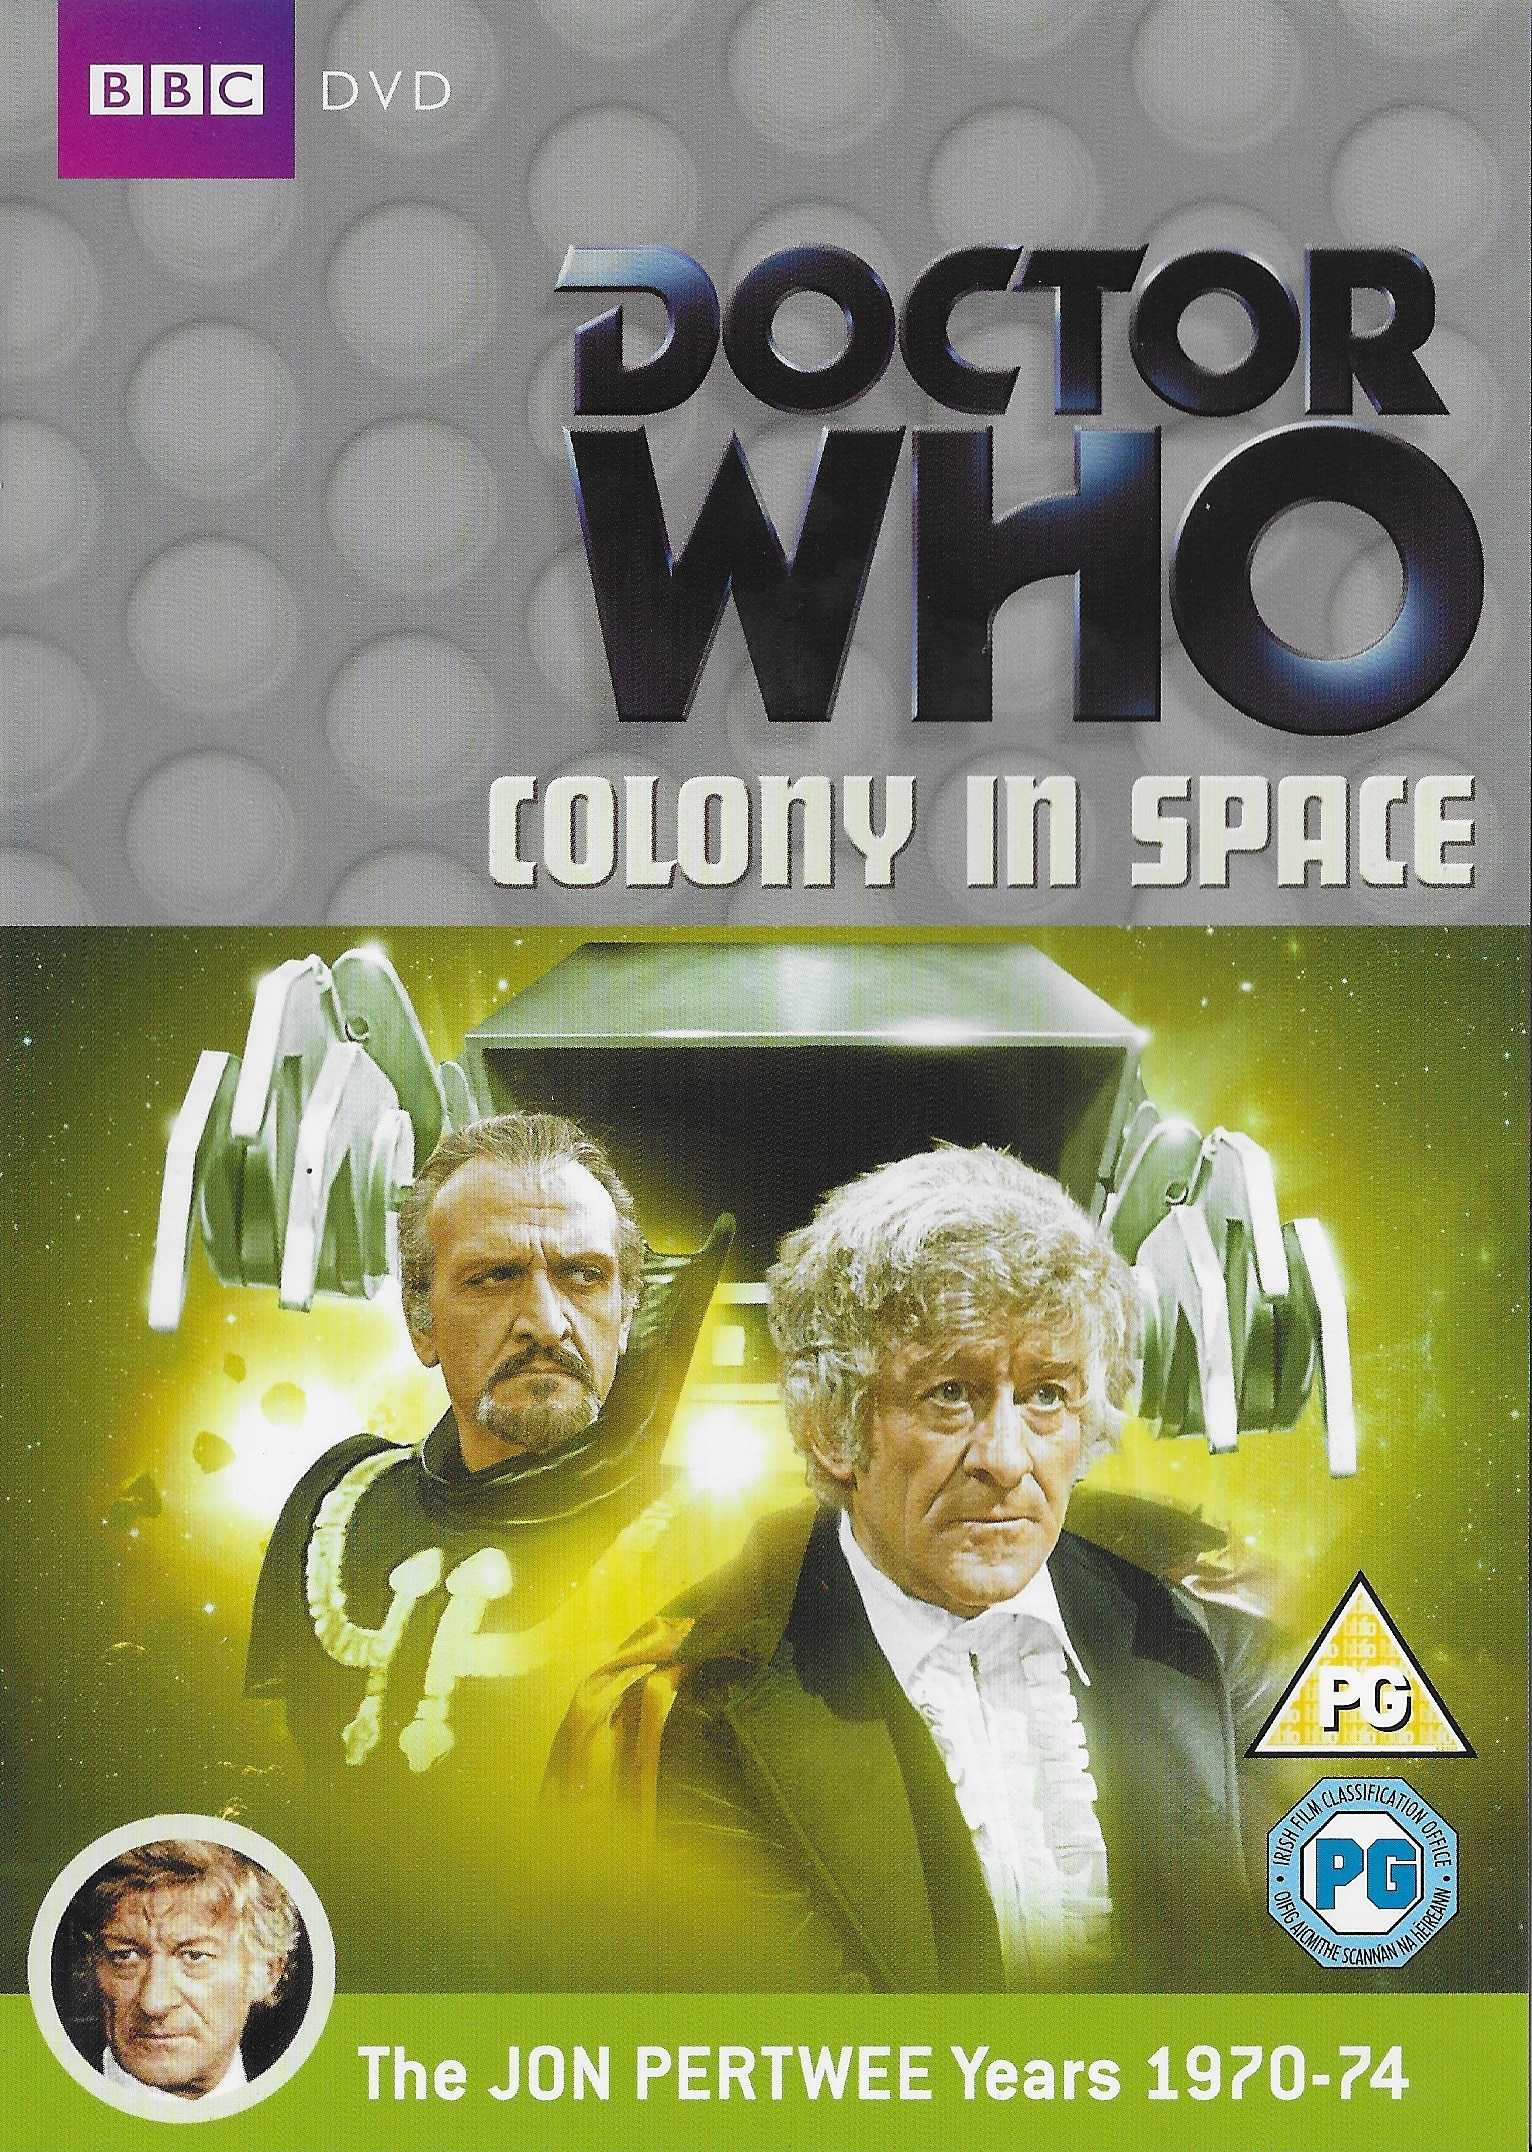 Picture of BBCDVD 3381 Doctor Who - Colony in space by artist Malcolm Hulke from the BBC dvds - Records and Tapes library